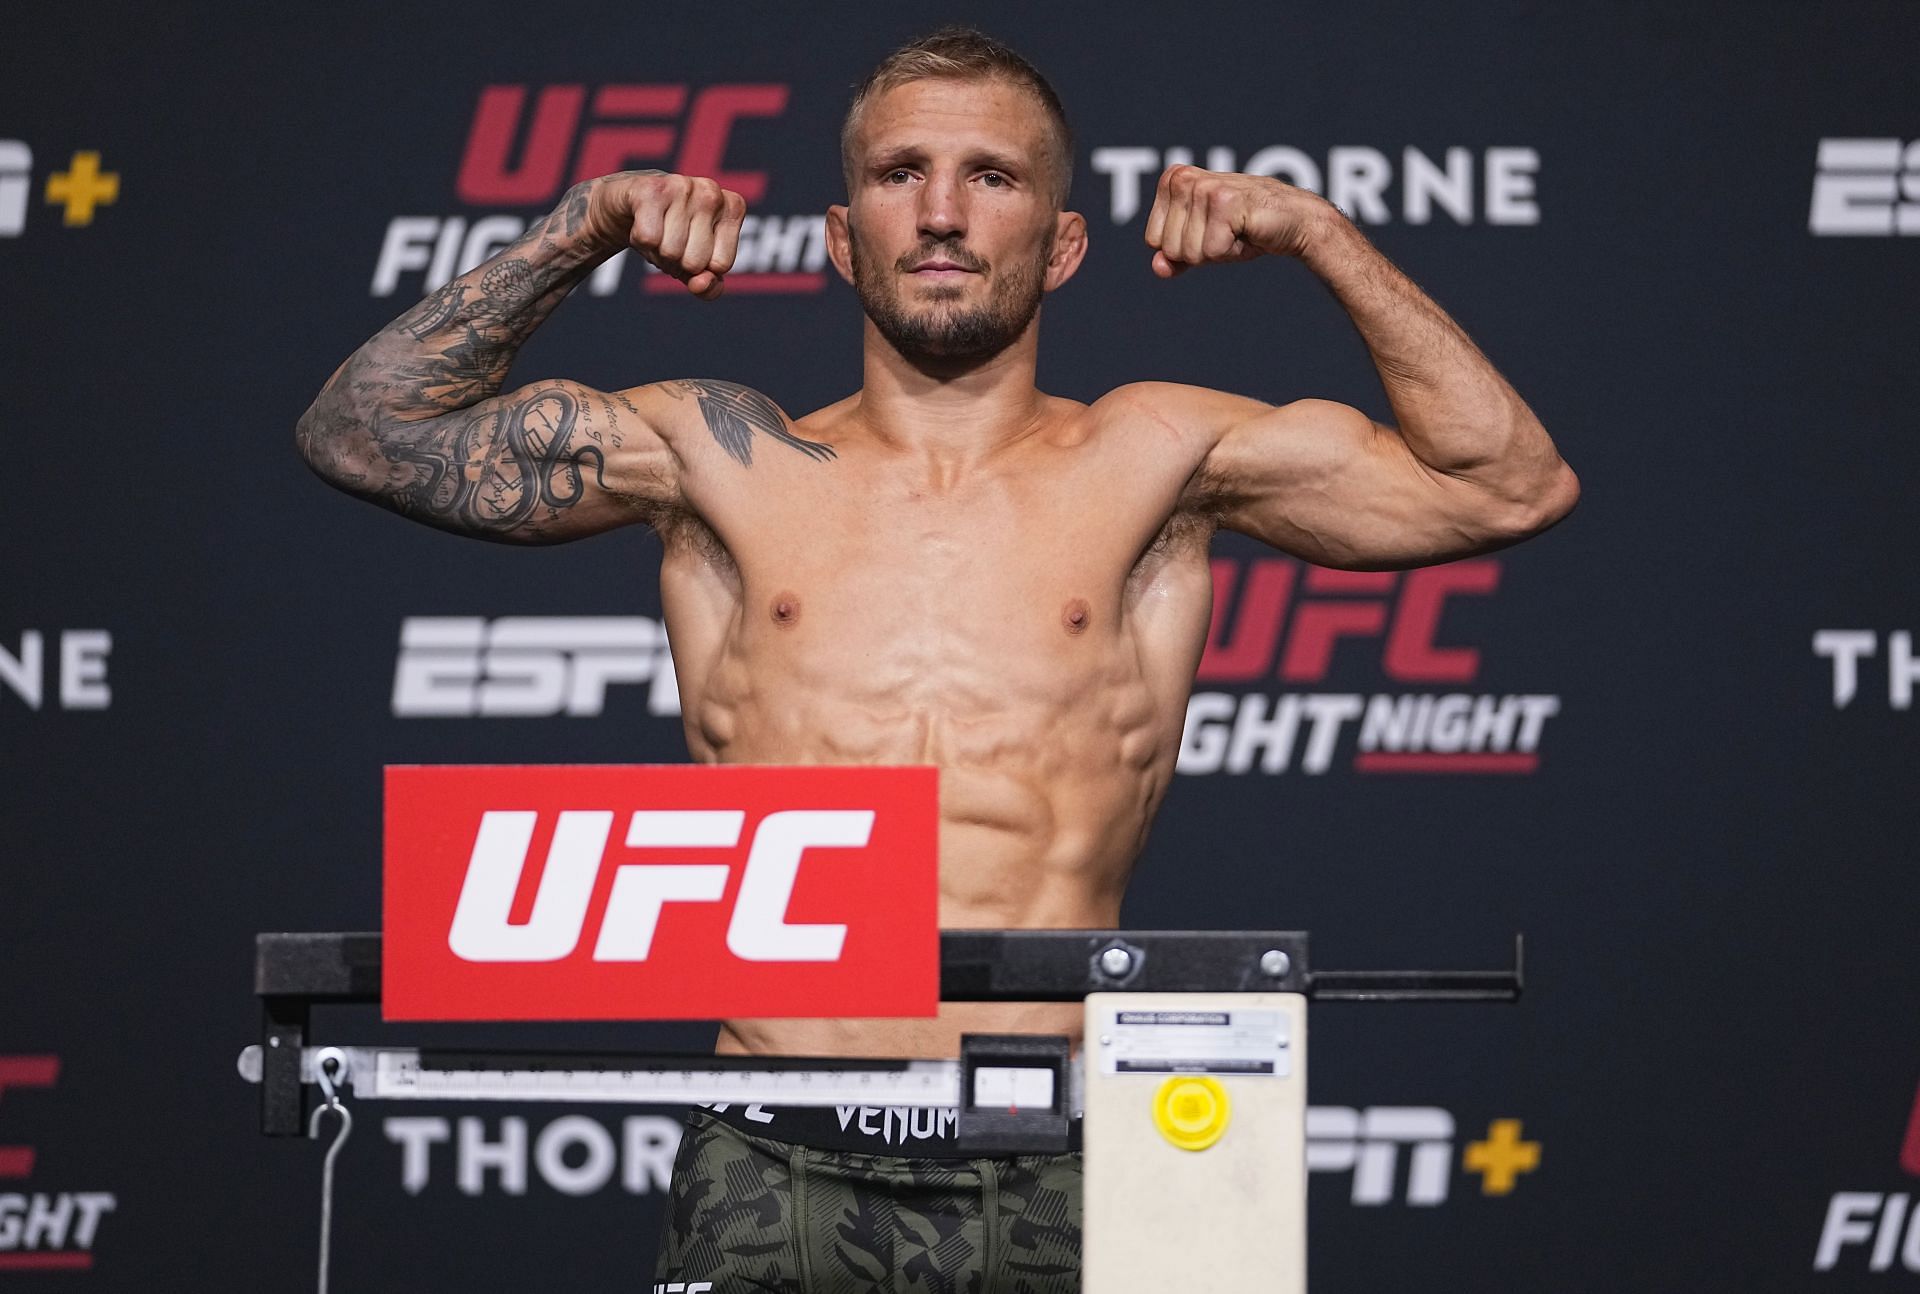 TJ Dillashaw came into his fight with Aljamain Sterling hiding a bad shoulder injury